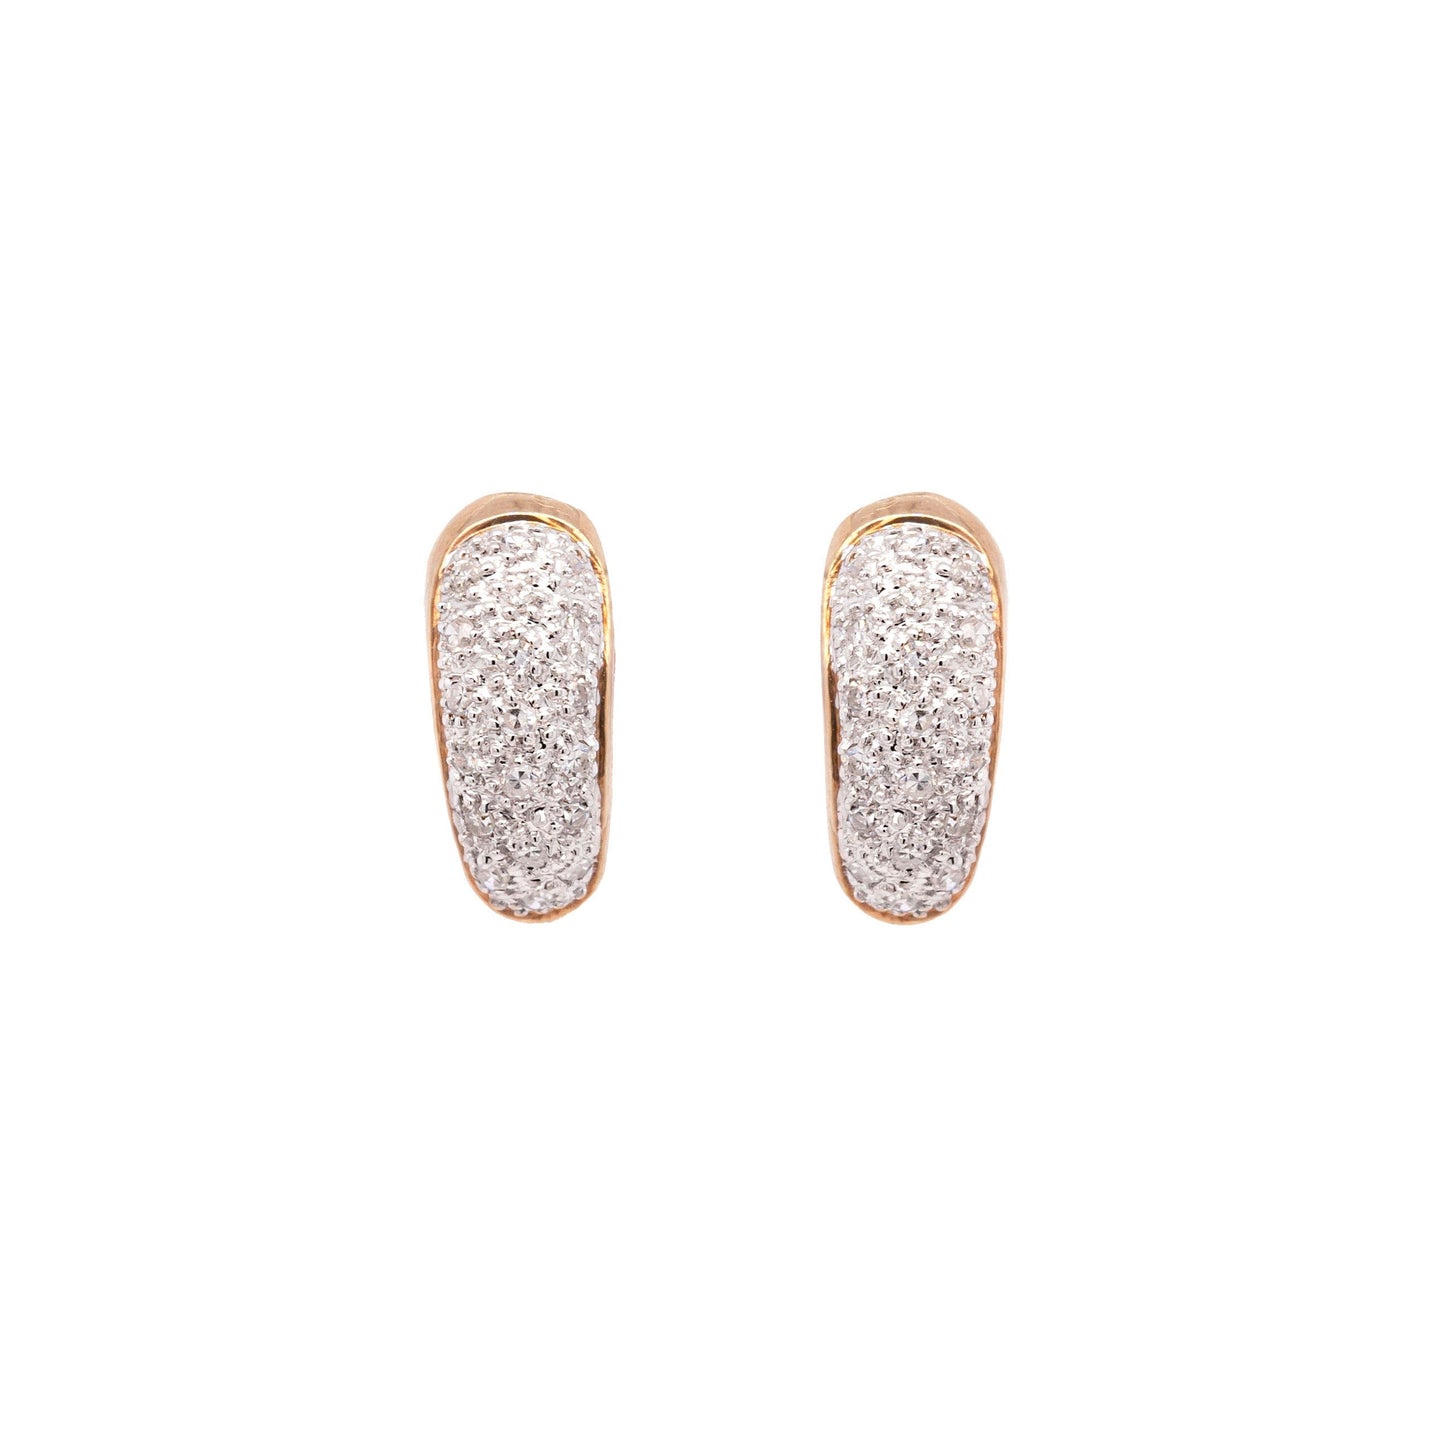 Diamond 9 Carat White and Yellow Gold Small Hoop Earrings